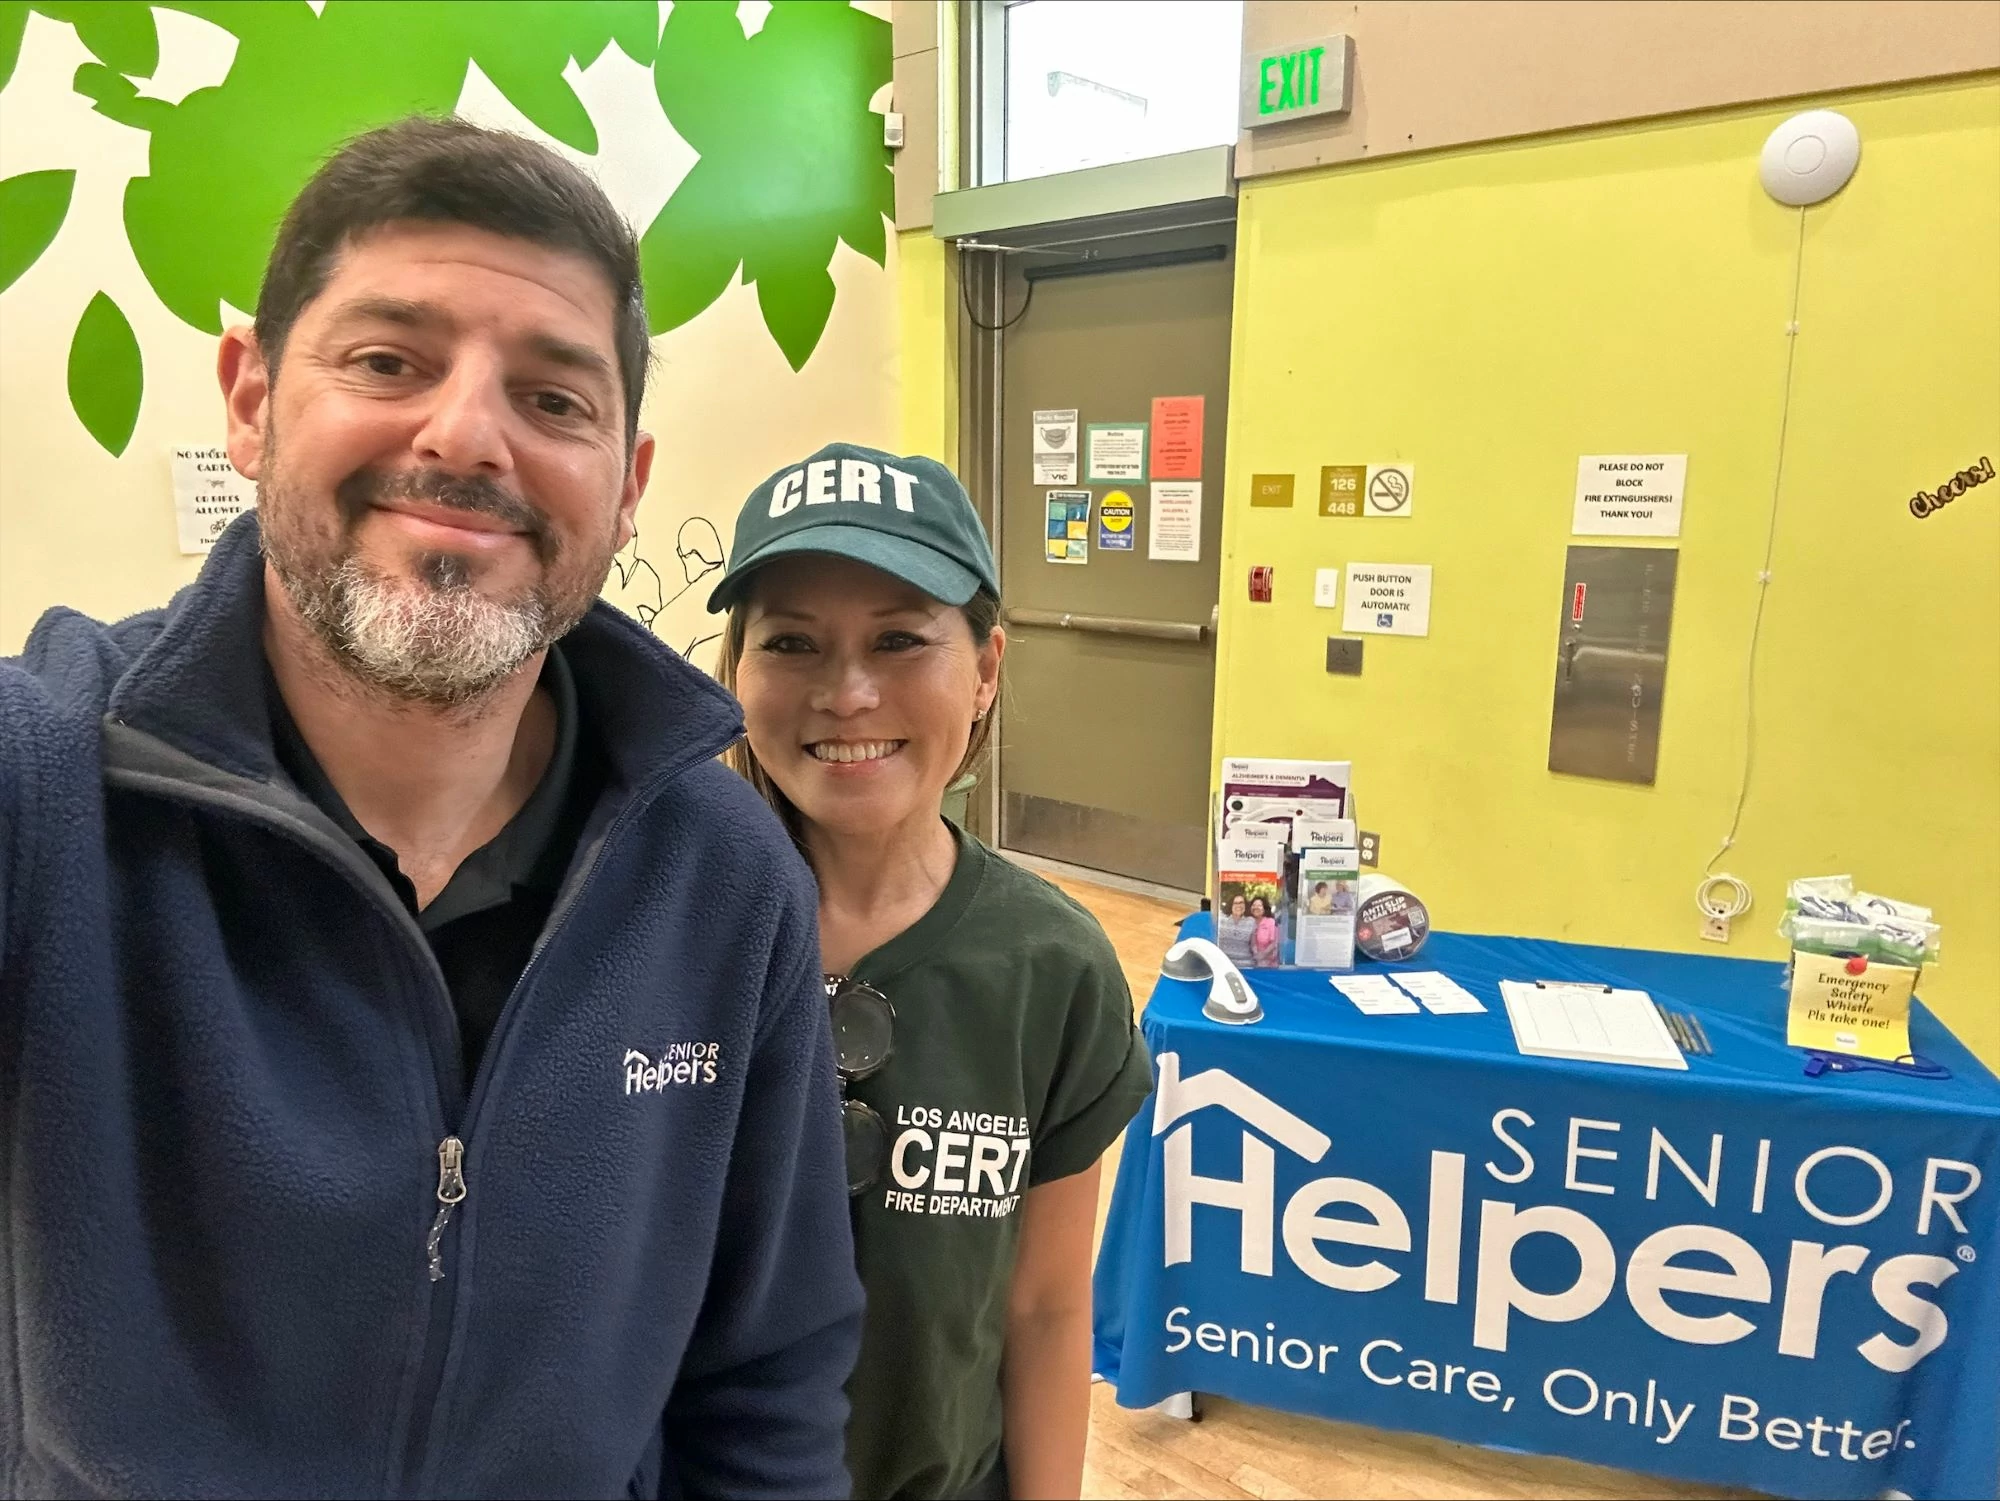 Our Owner and his wife are members of the Community Emergency Response Team in LA a.k.a. the LA CERT. Today we participated in a CERT disaster preparedness event for seniors at the local senior center.